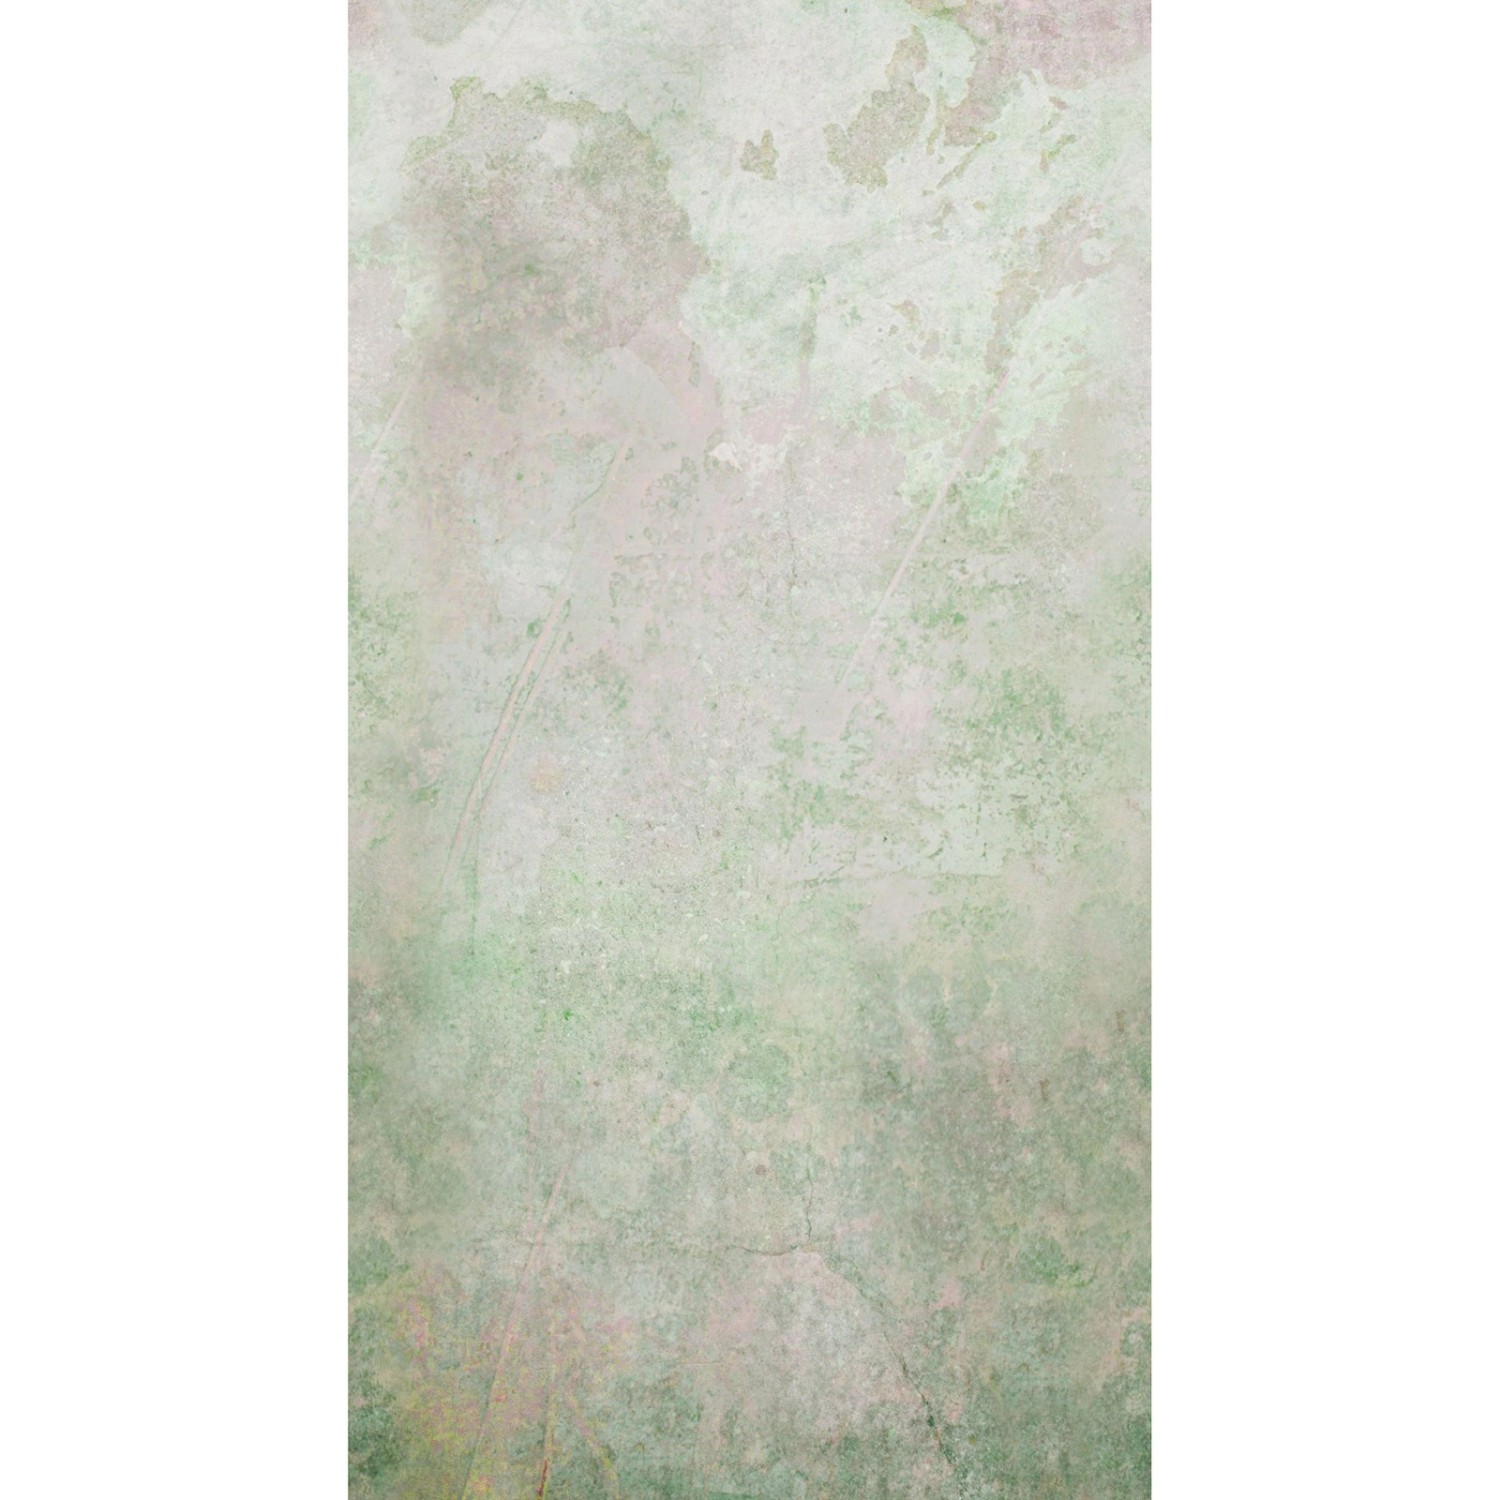 Art for the Home Fototapete Pure nature faded 280 x 150 cm von Art for the Home